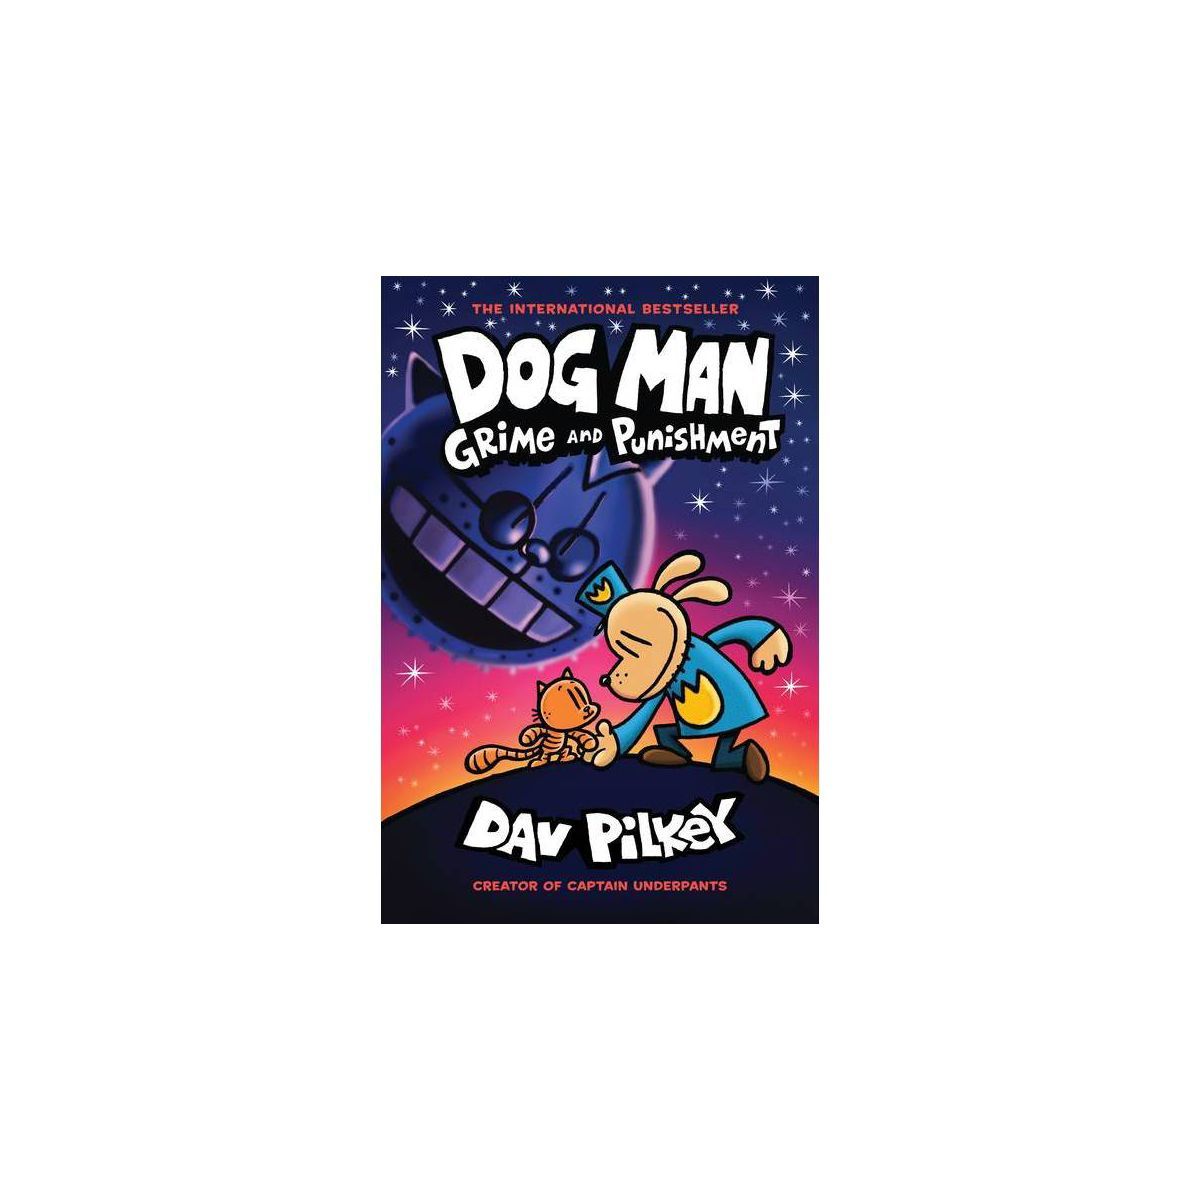 Dog Man #9 Grime and Punishment - by Dav Pilkey (Hardcover) | Target